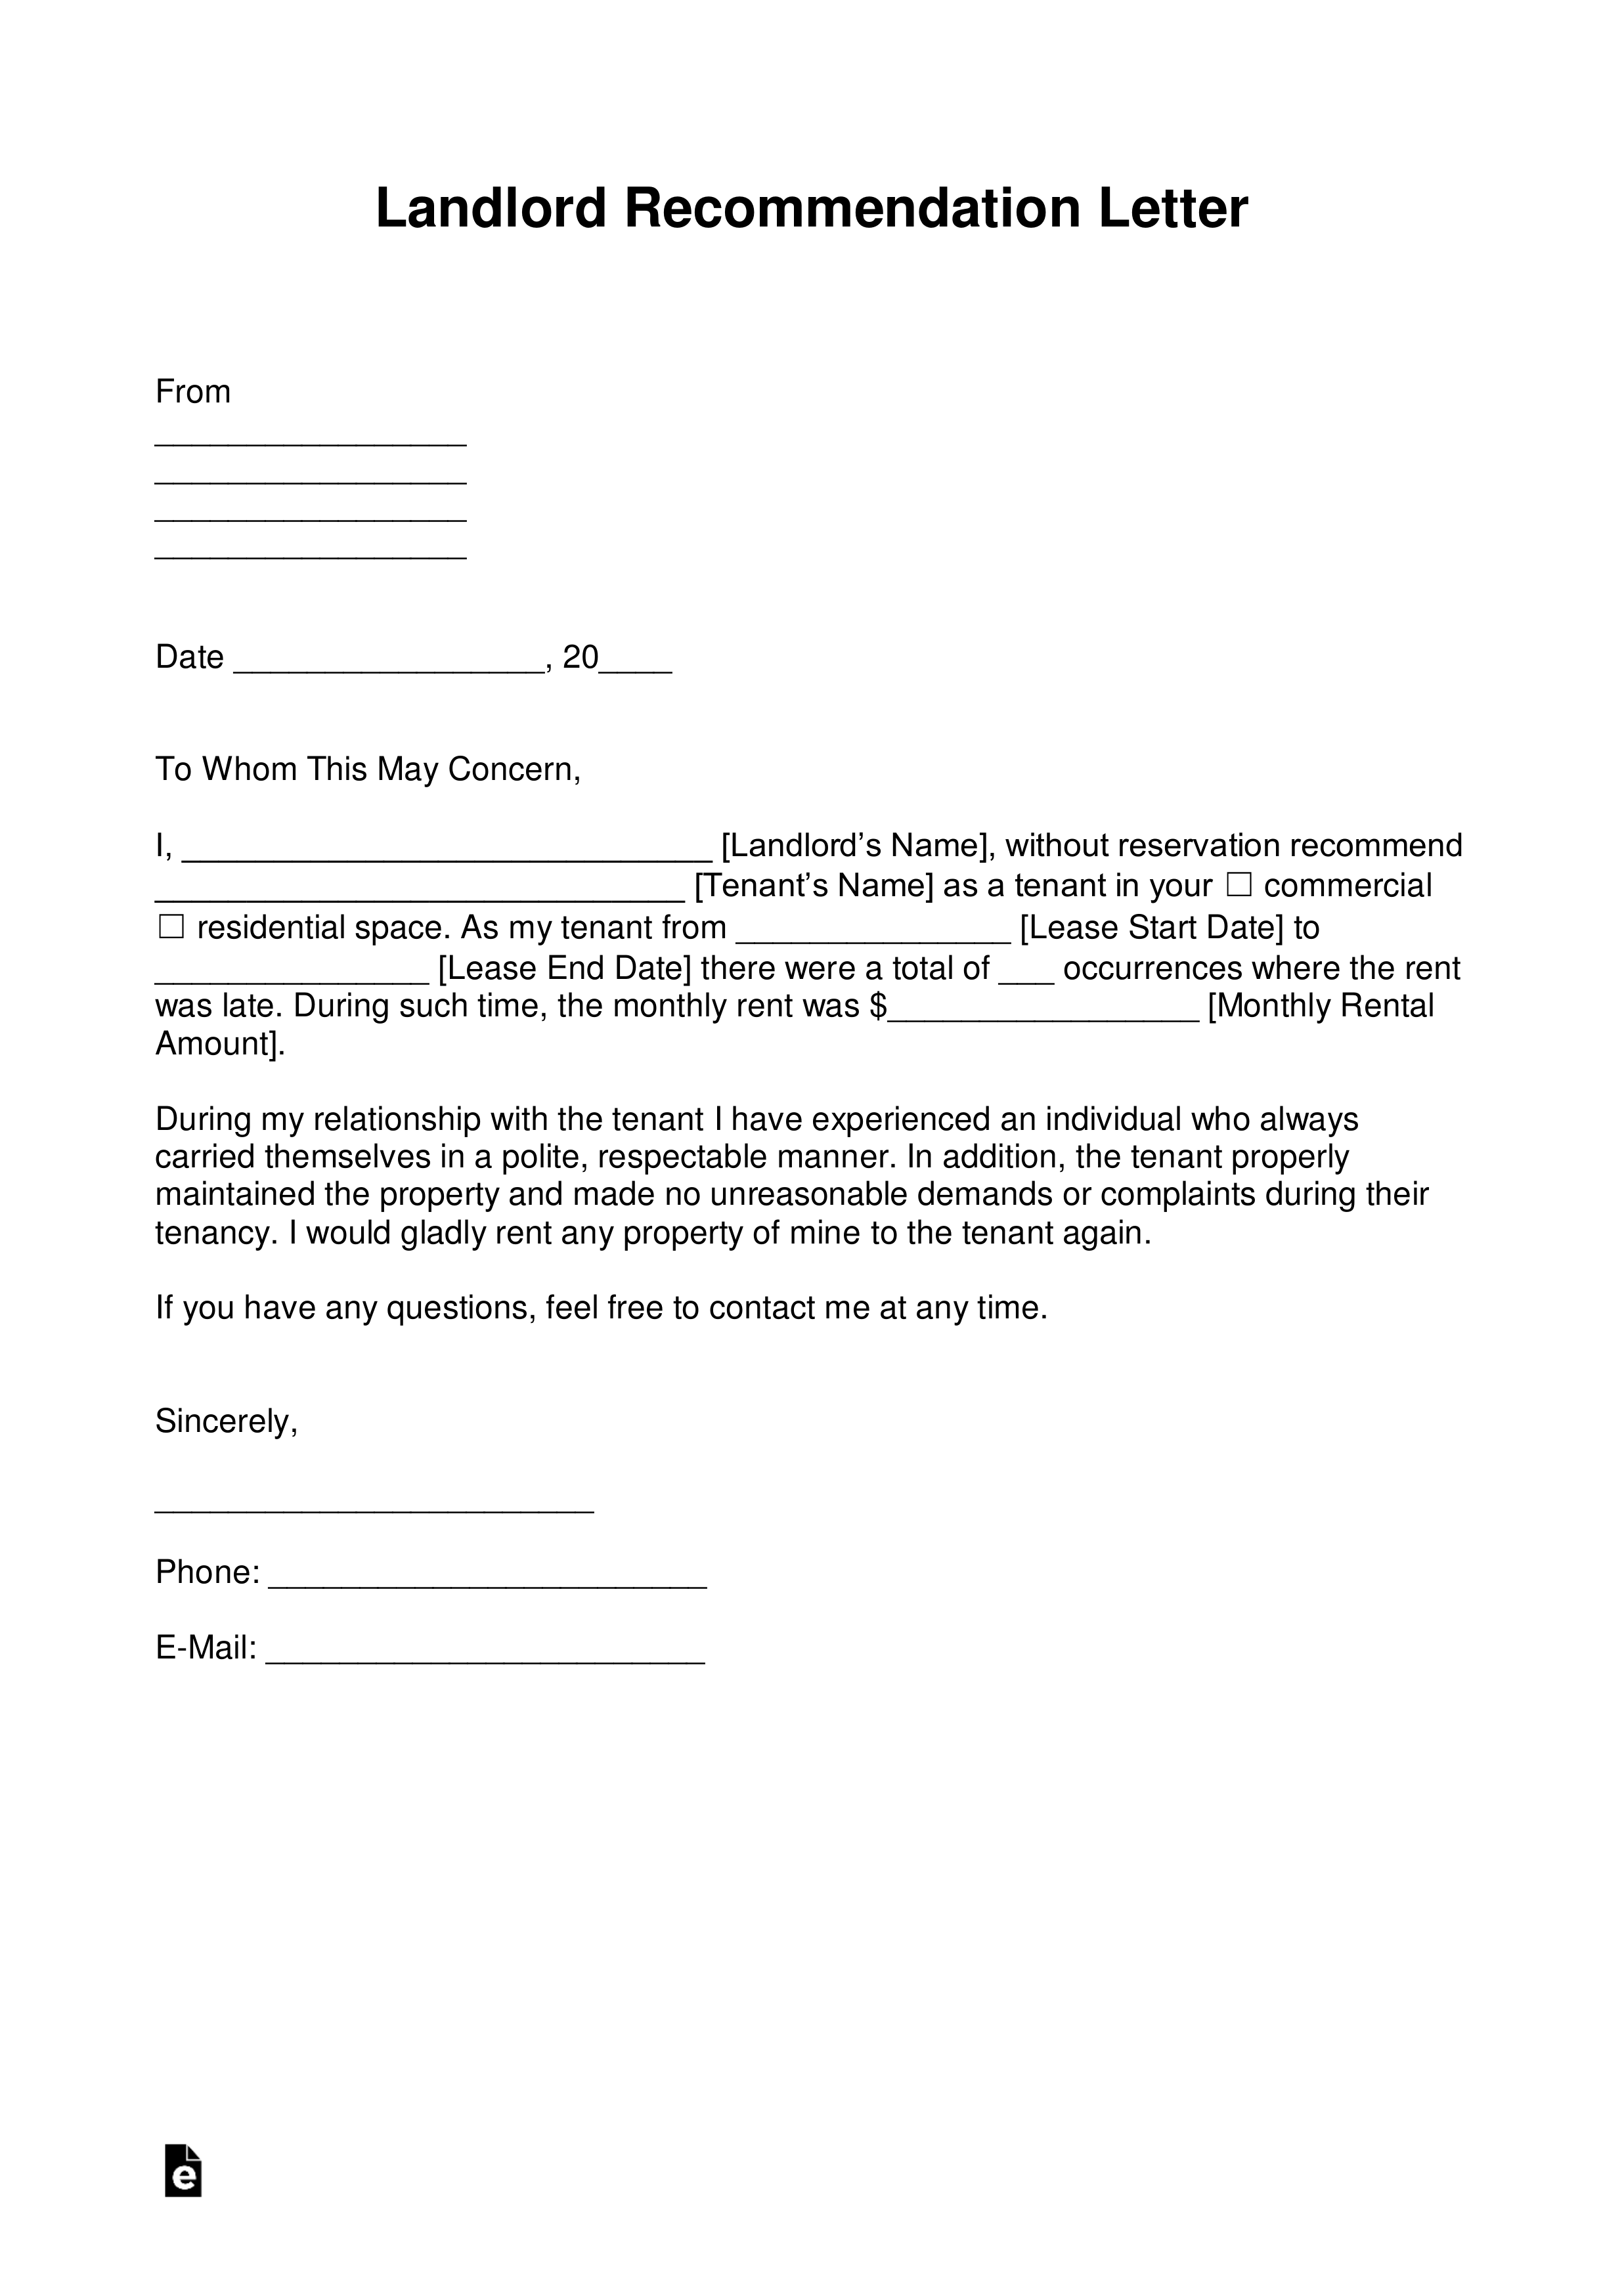 Free Landlord Letter (for a Tenant) with Samples PDF